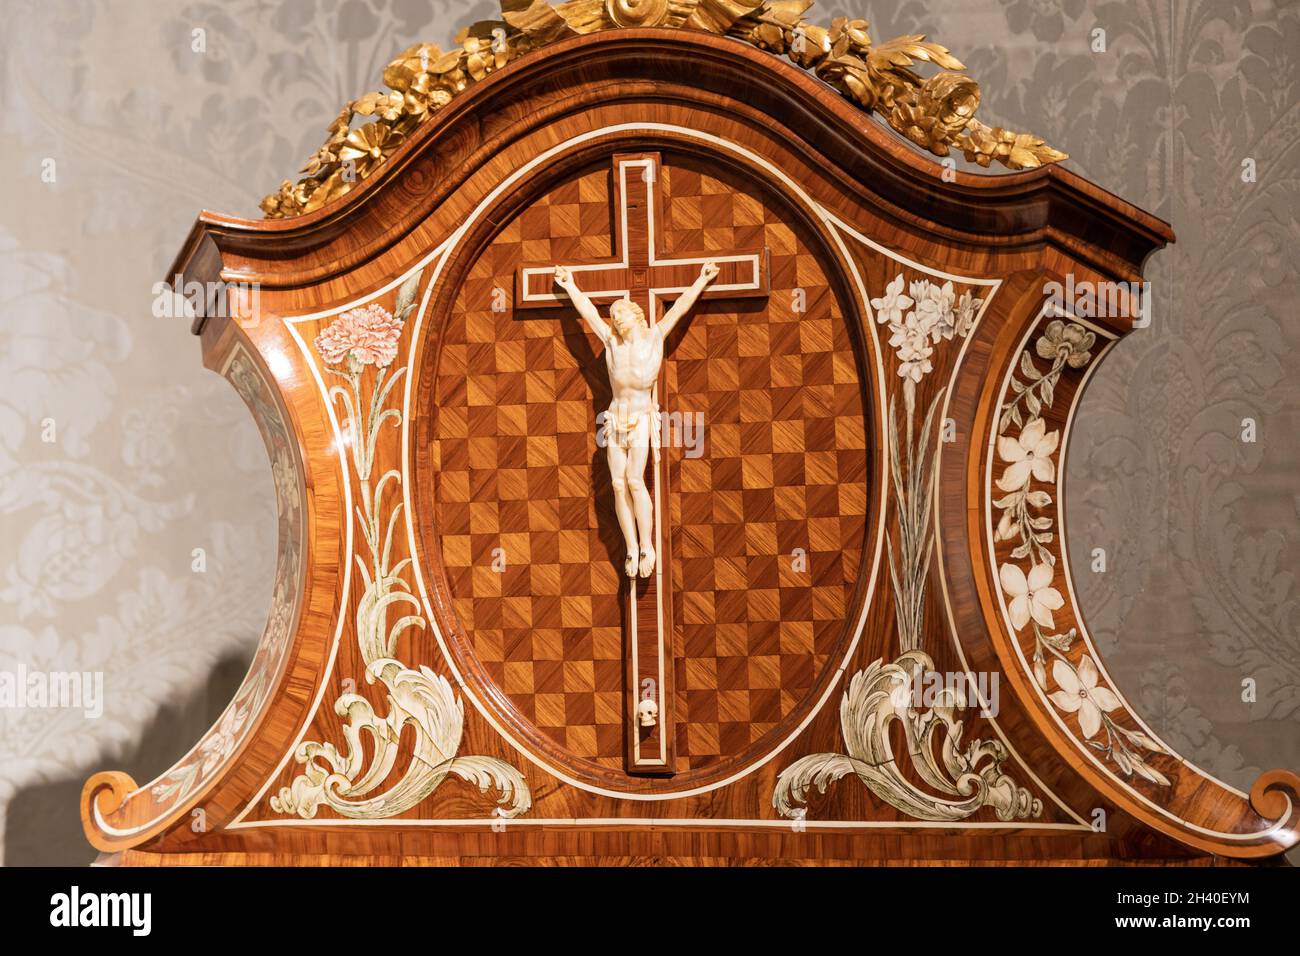 Old crucifix made of wood and ivory. Jesus Christ symbol of resurrection and life after the death. Stock Photo